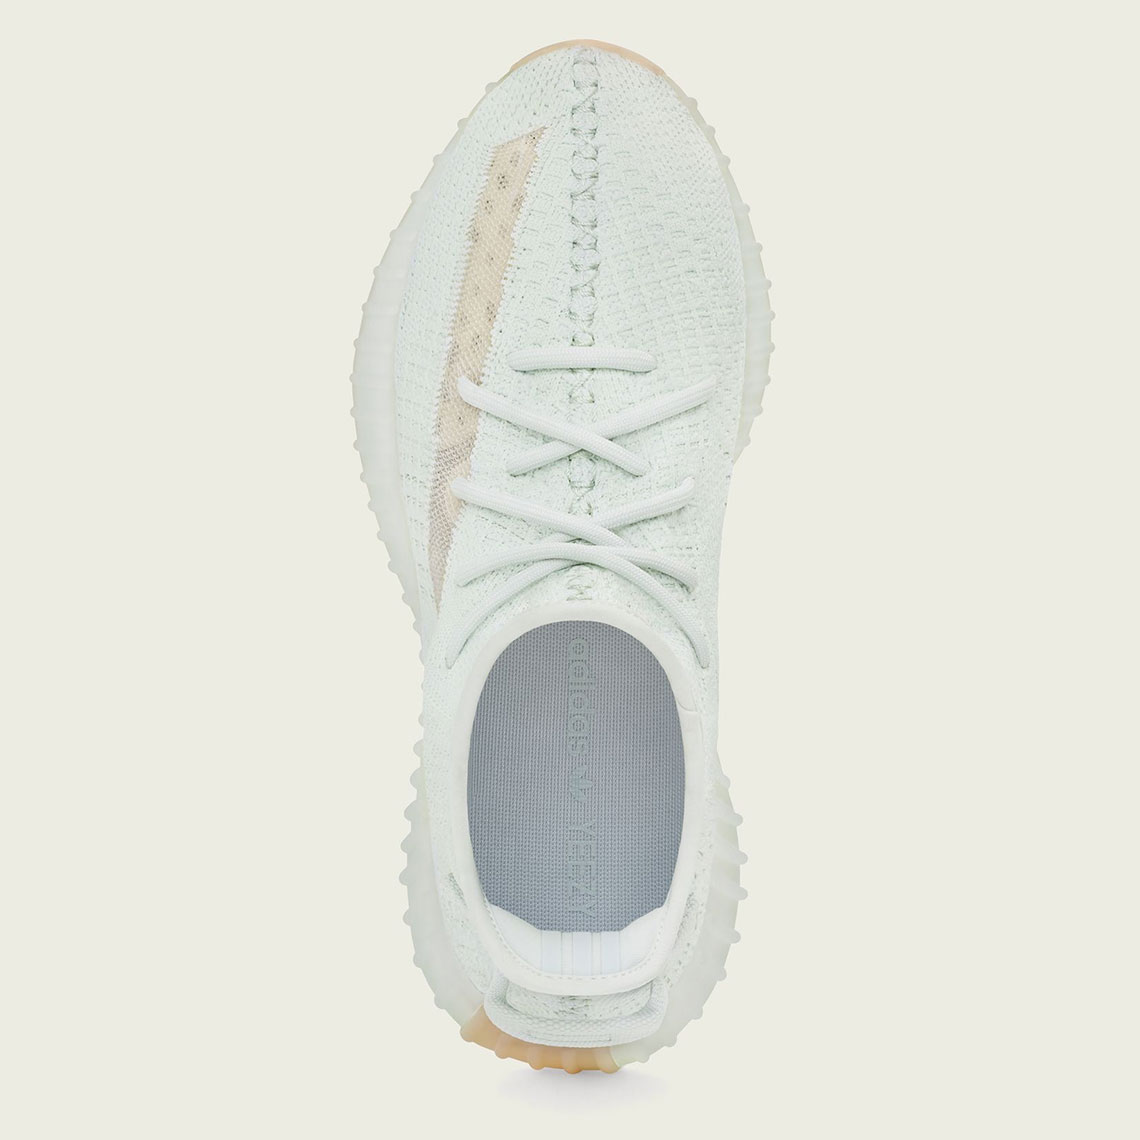 Adidas Yeezy Boost 35 V2 Hyperspace Eg7491 Release Details 2